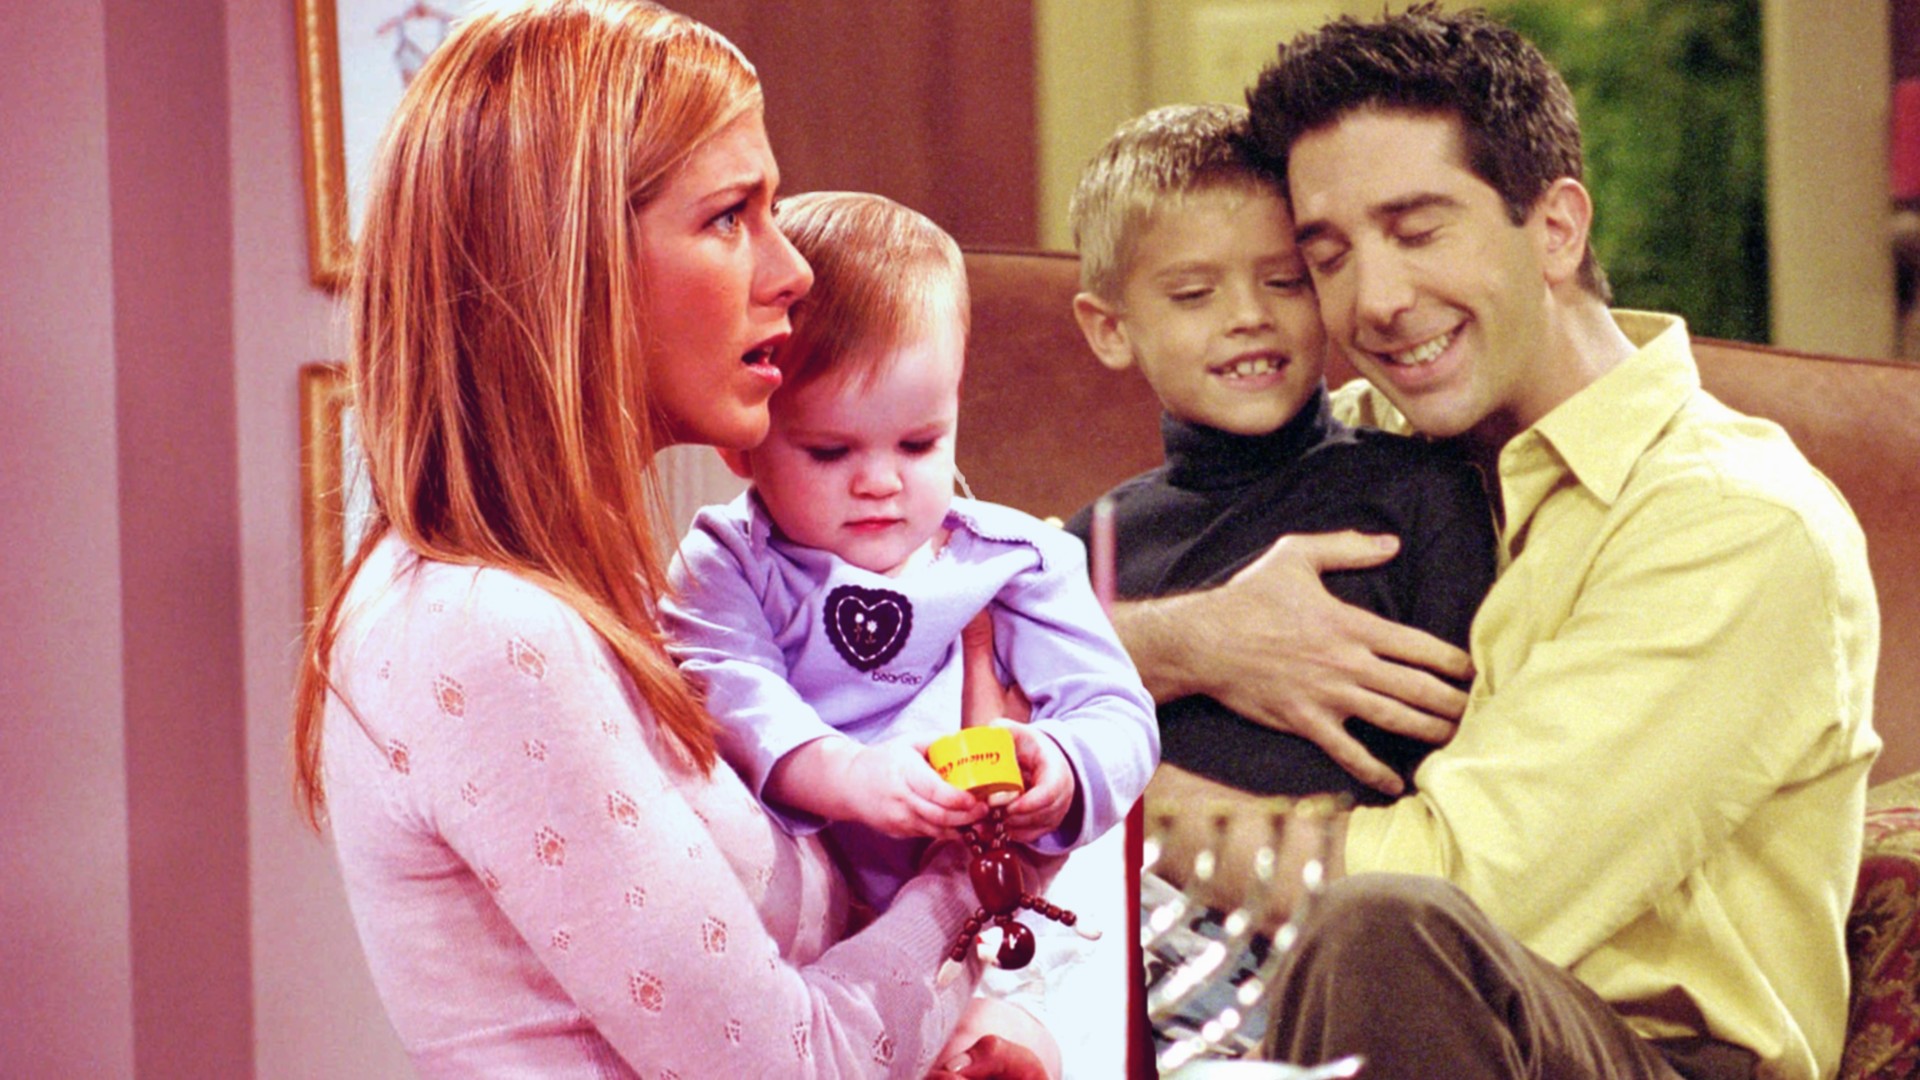 The Kids from Friends Are All Grown Up: Here's What They Look Like Now